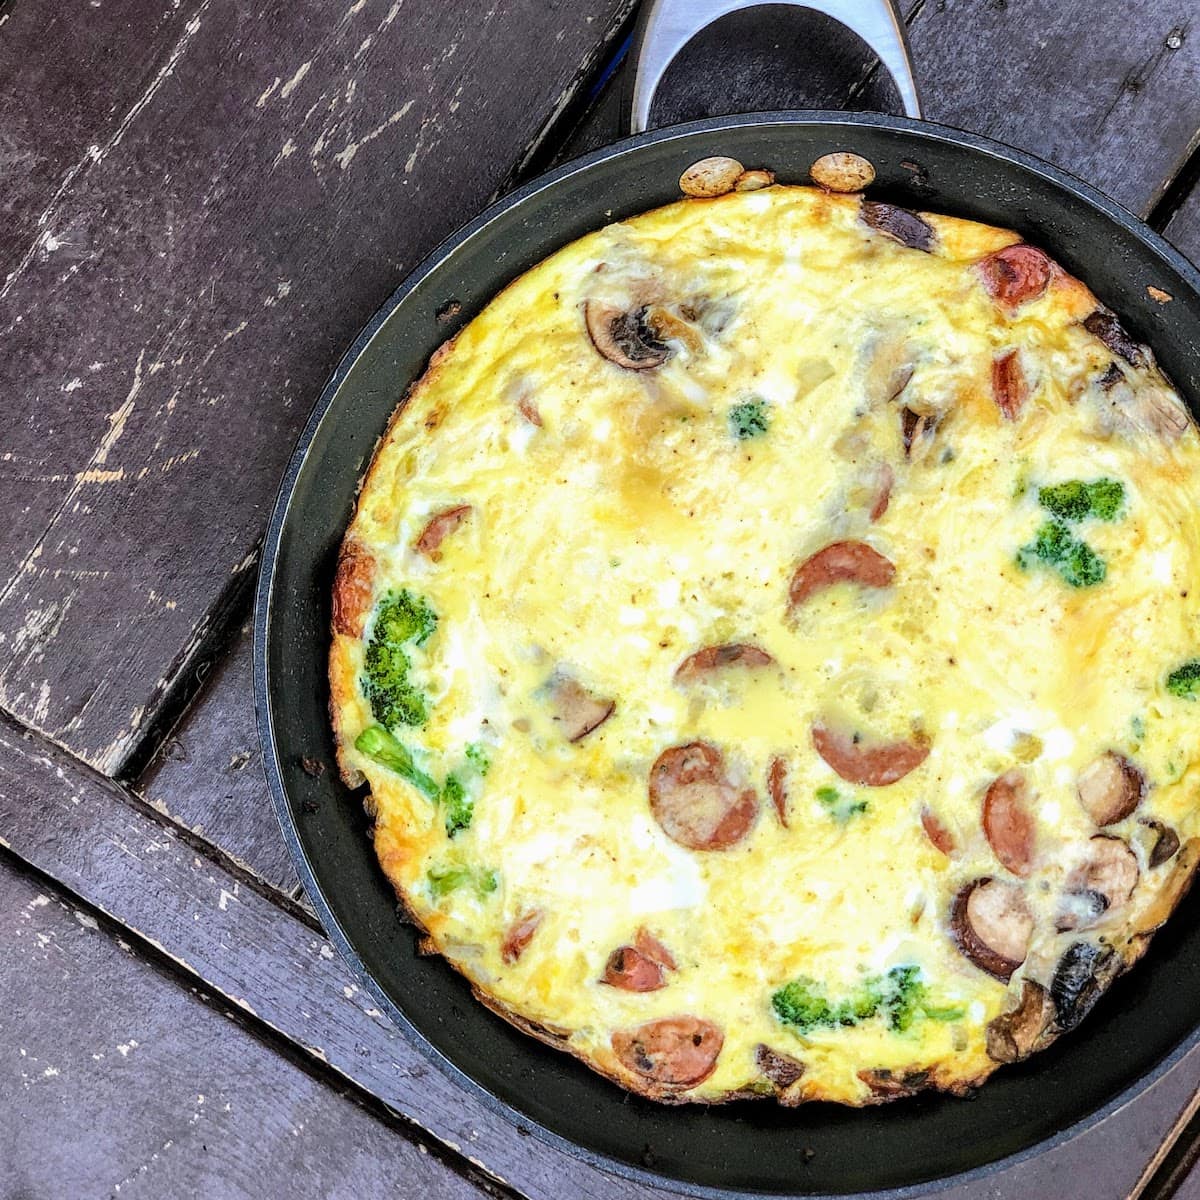 baked frittata in pan with sausage, mushrooms and broccoli